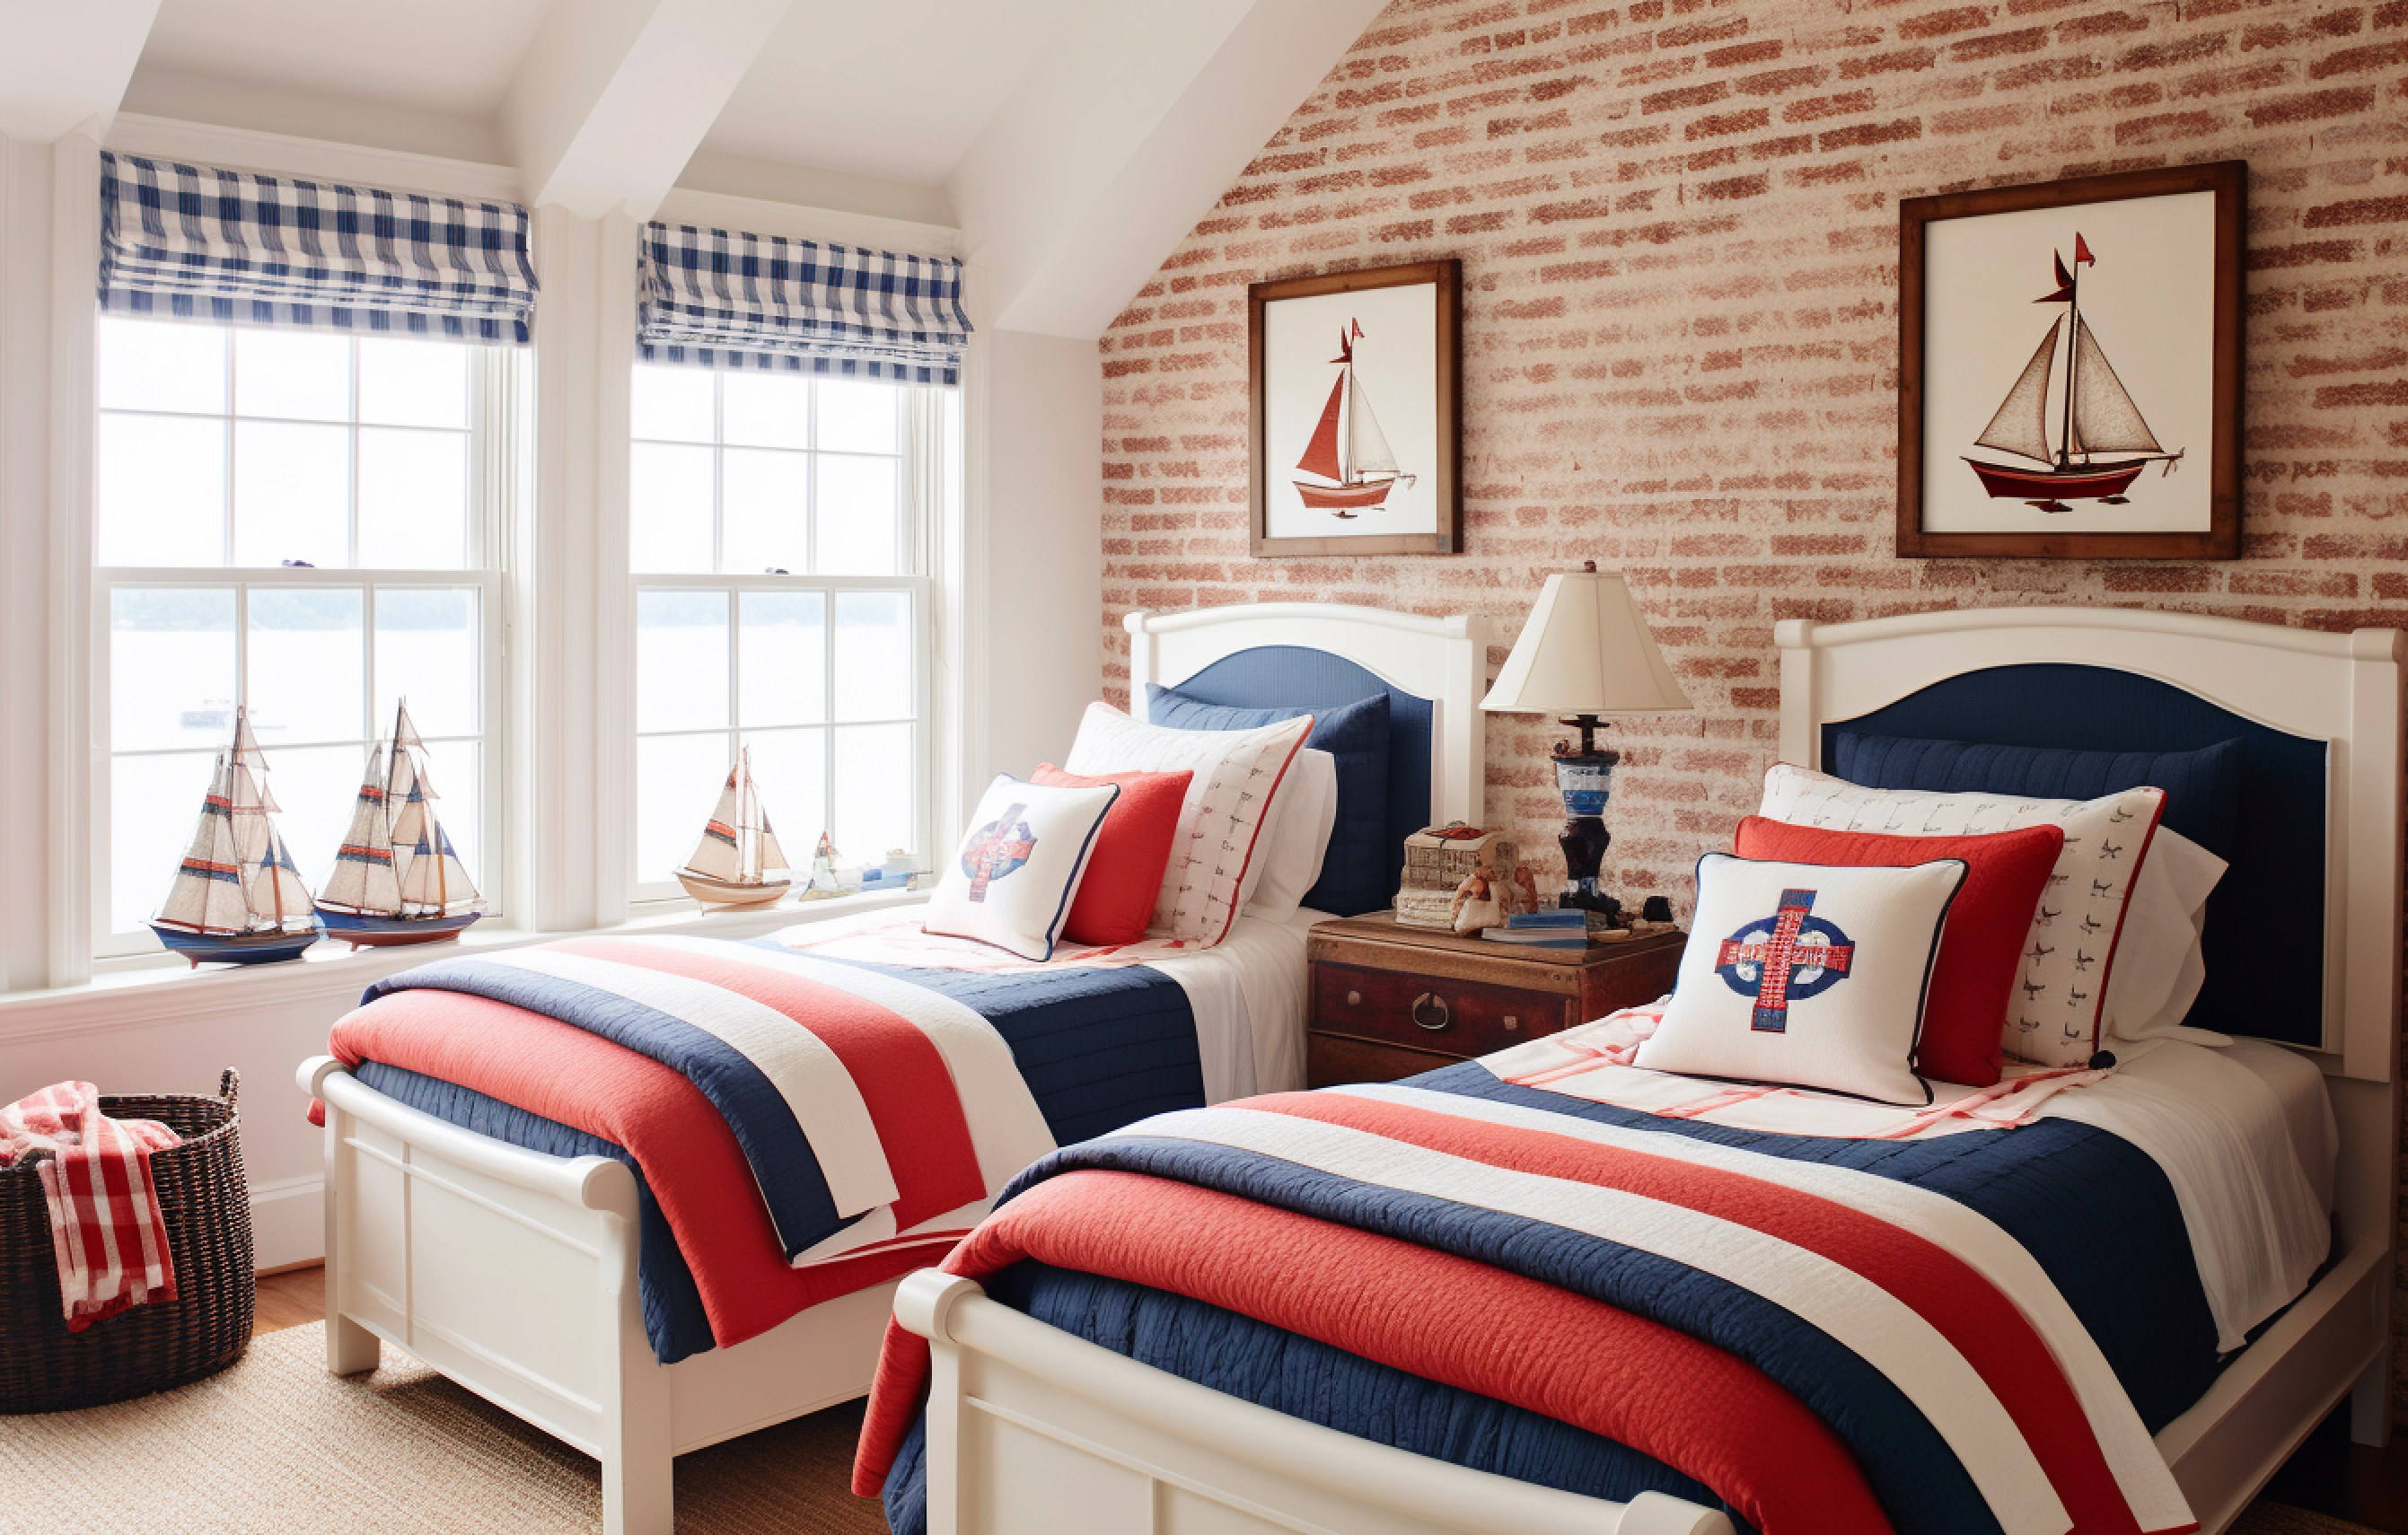 10. Red, White, and Blue Color Scheme - Nautical Themed Bedroom